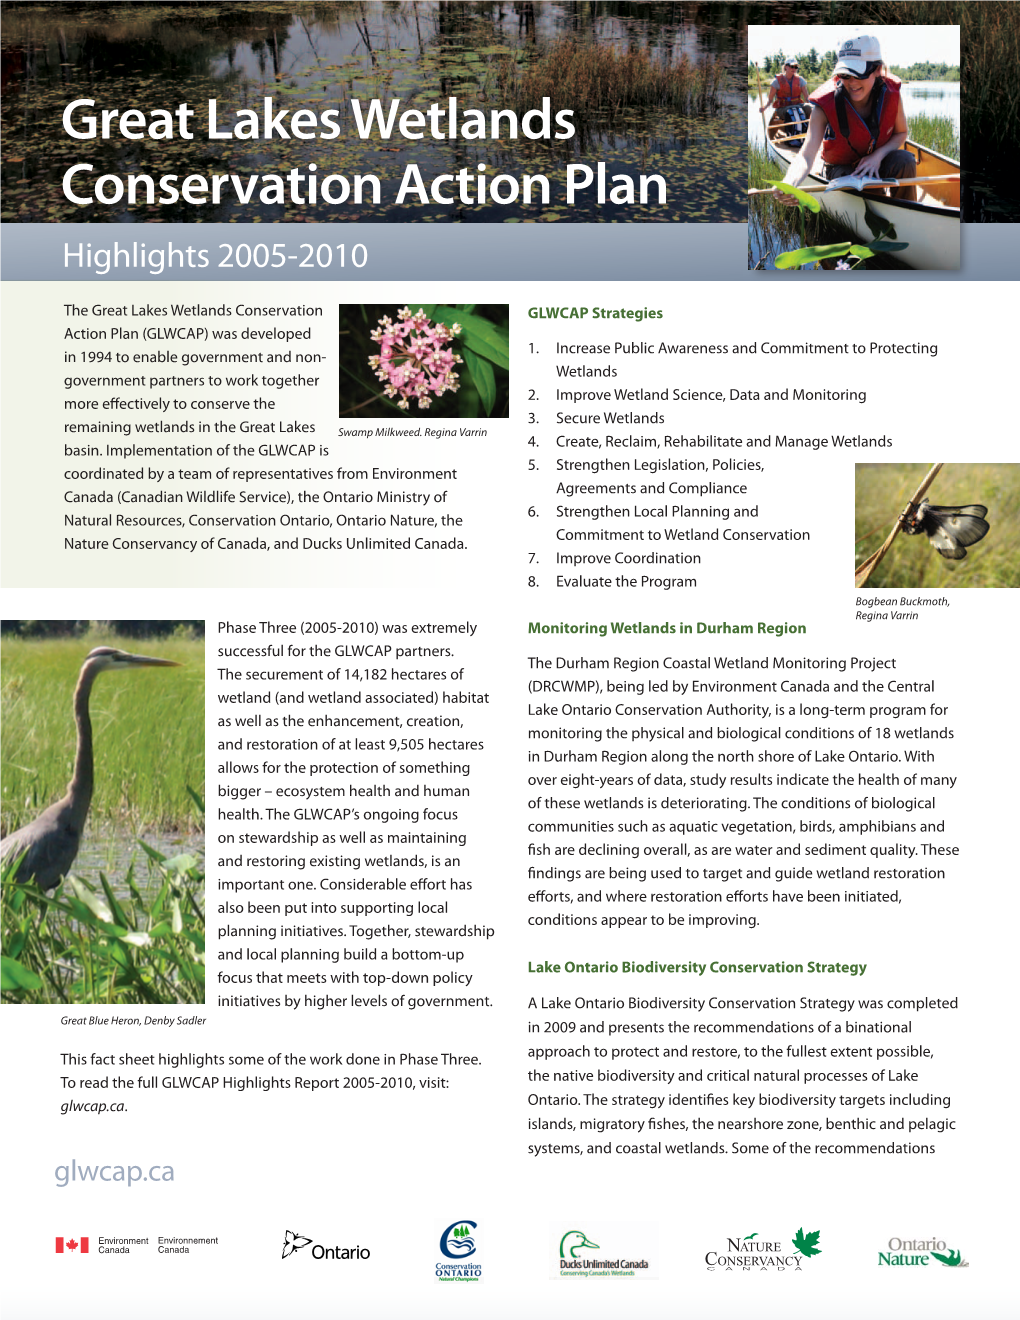 Great Lakes Wetlands Conservation Action Plan Highlights 2005-2010